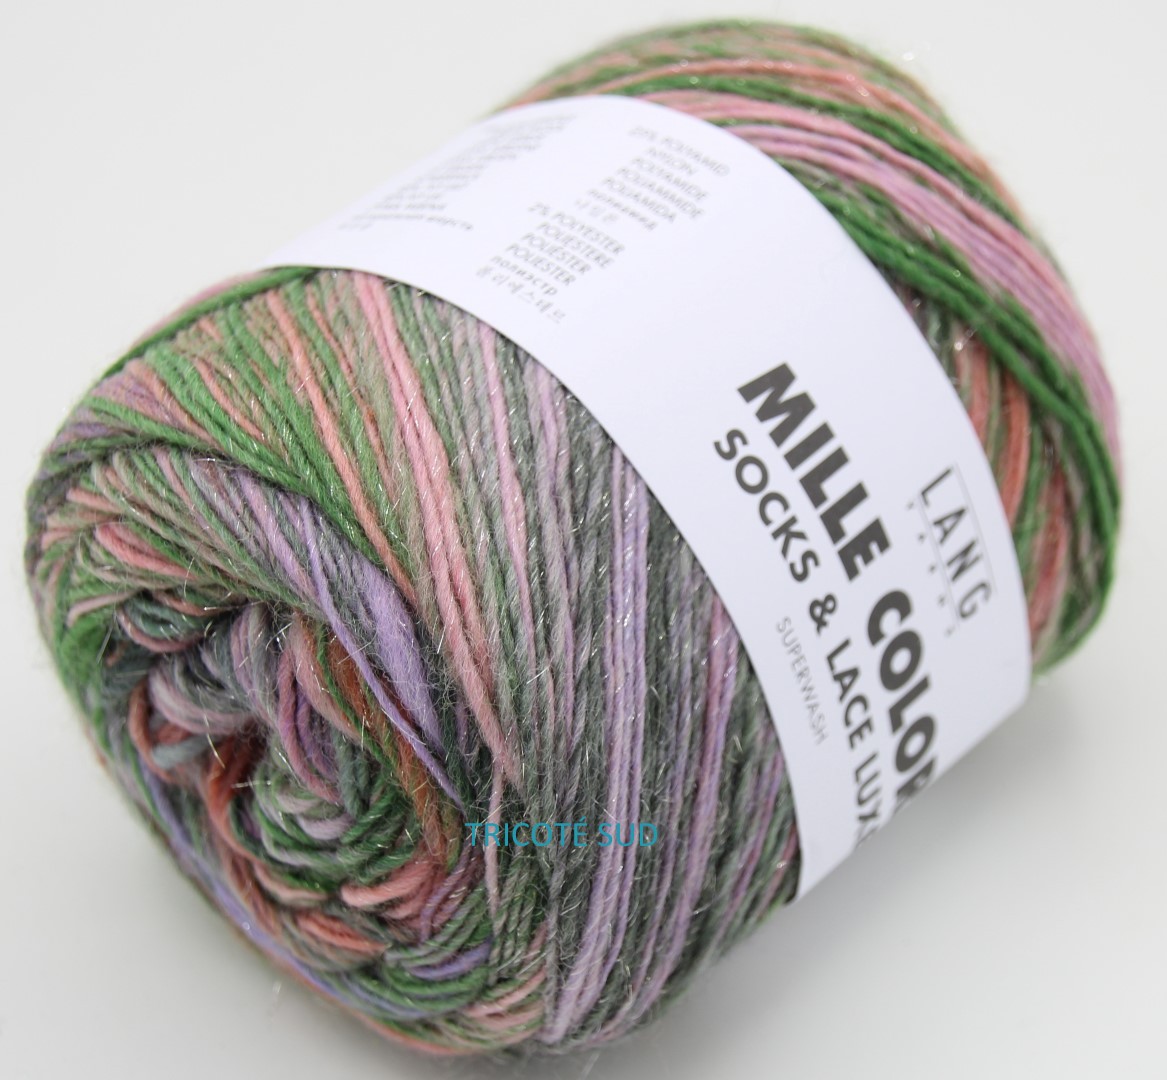 MILLE COLORI SOCKS AND LACE LUXE LANG YARNS COLORIS 203 (1) (Large)